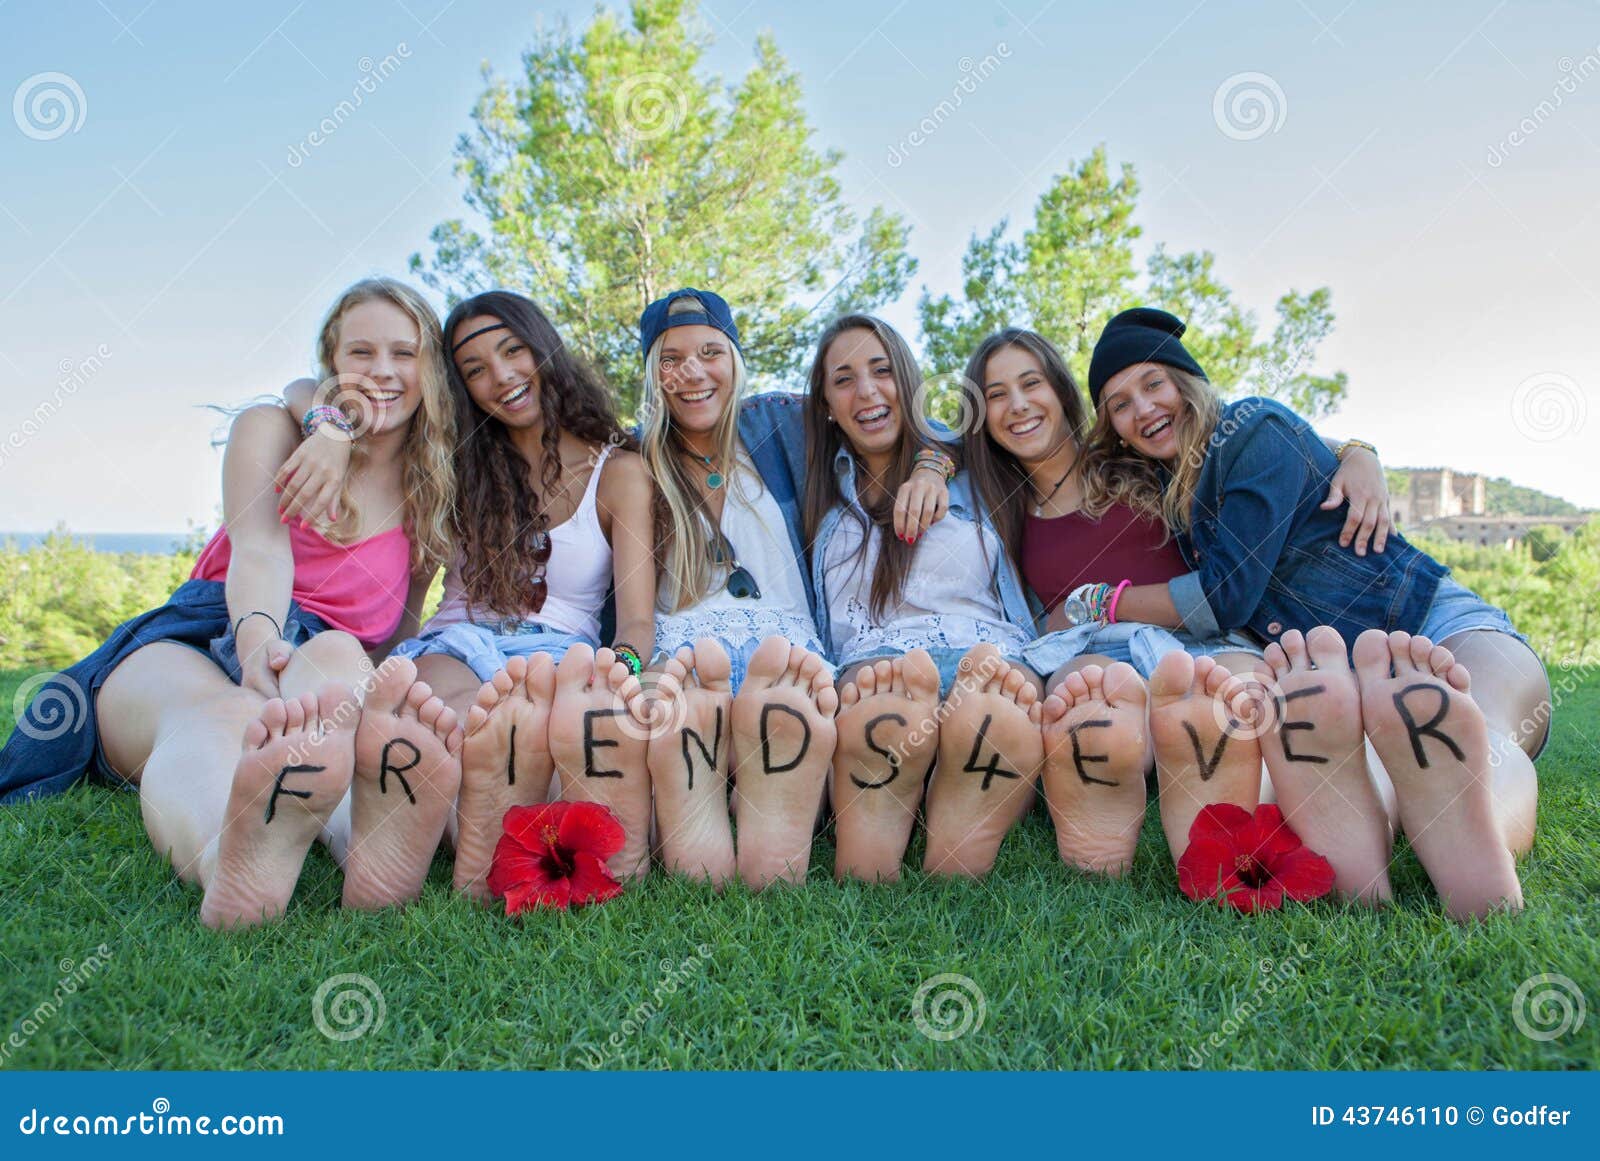 Group of Happy Girls Friends for Ever Stock Photo - Image of laugh ...